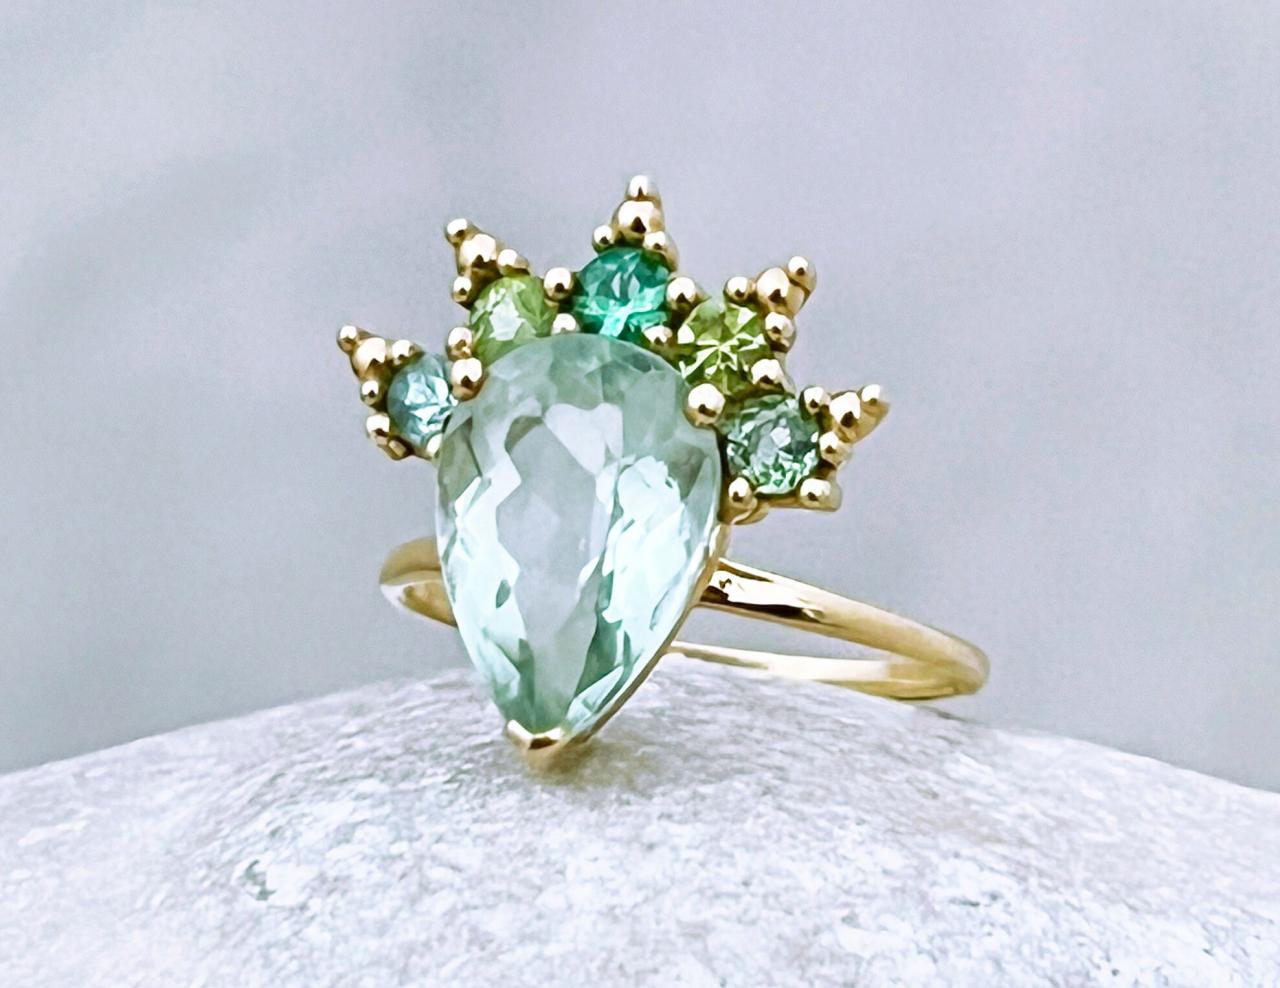  Solid gold engagement ring with green amethyst, Pear shaped natural tourmaline statement ring, 18k gemstone crown promise ring